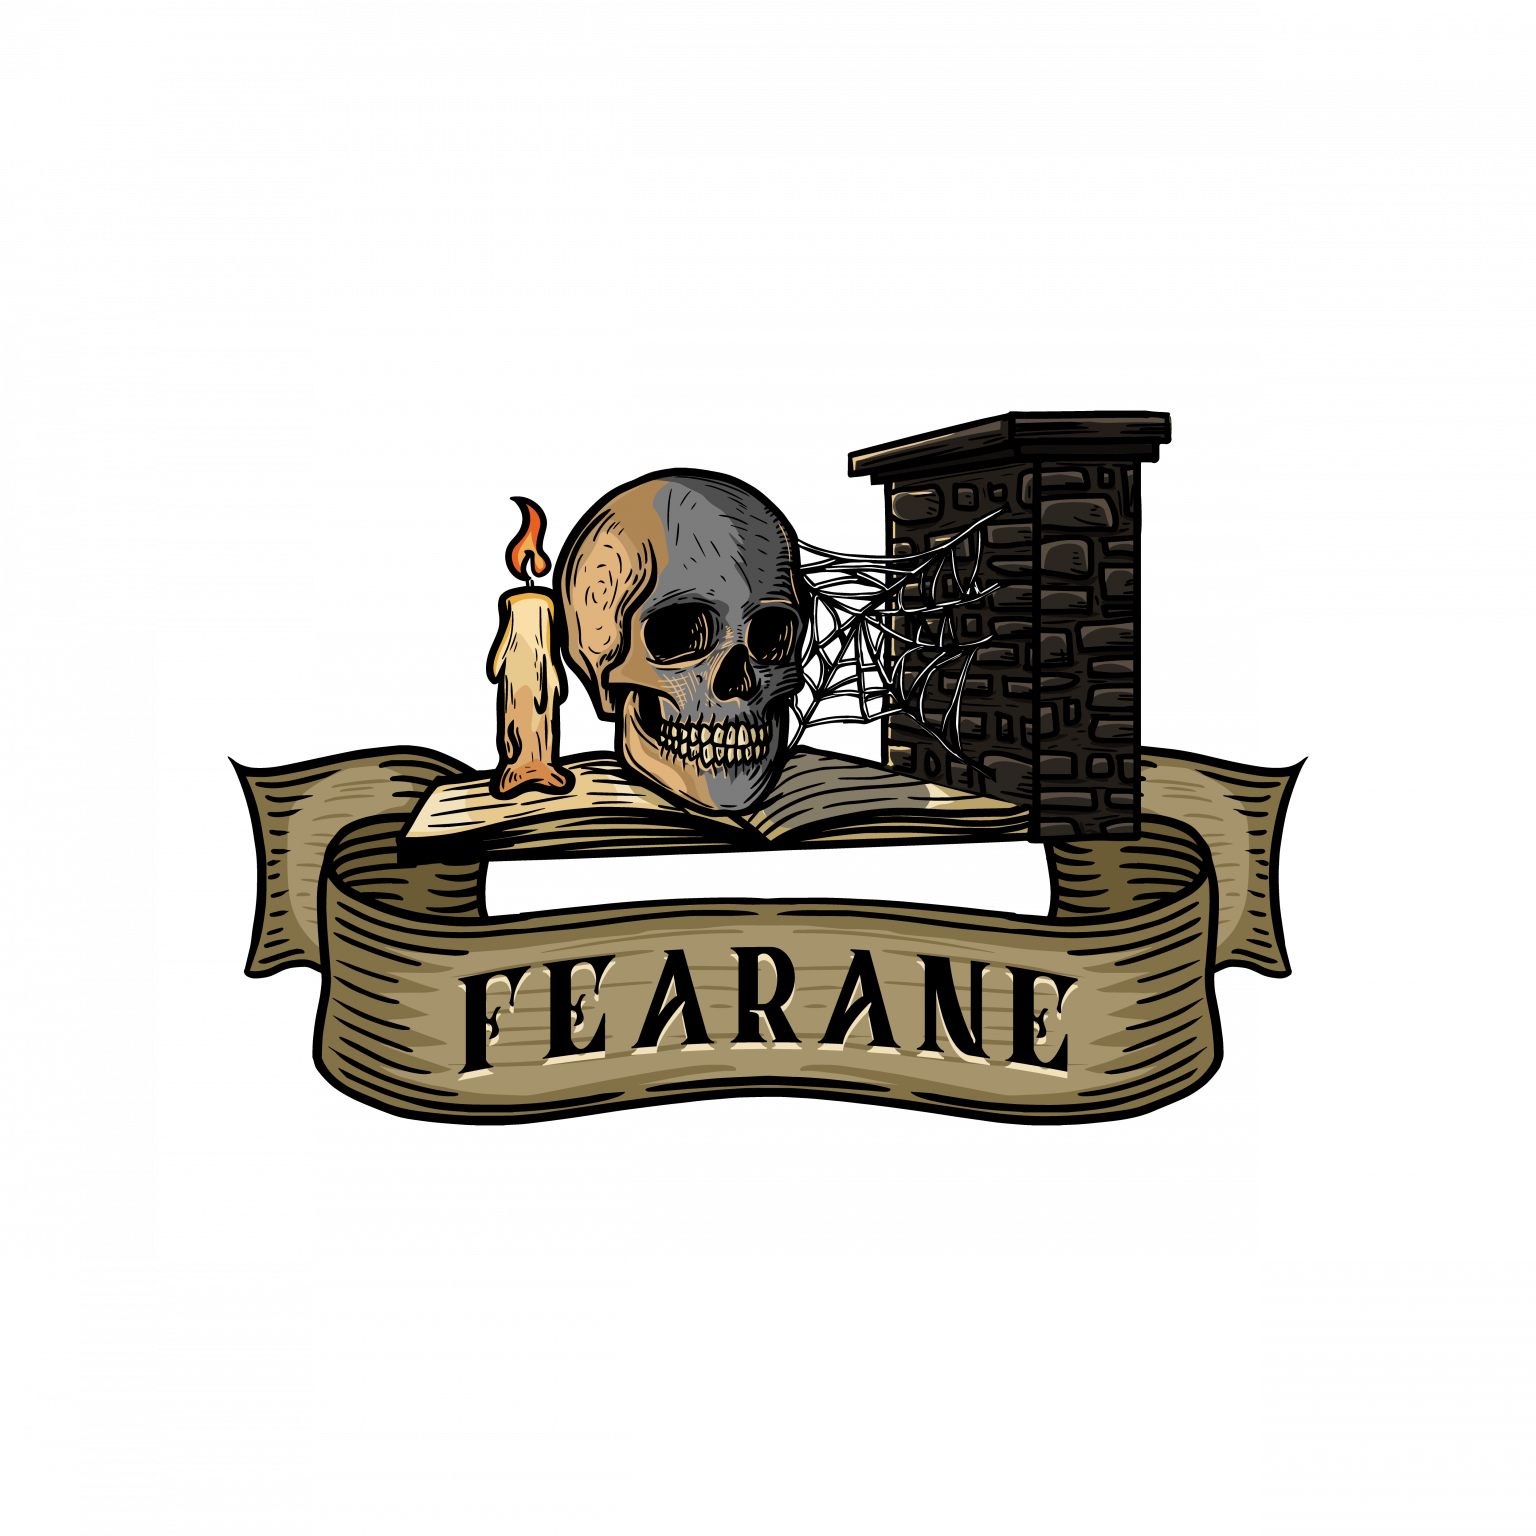 Fearane-Logo-PNG-Transparent-Background-1-1536x1536.png